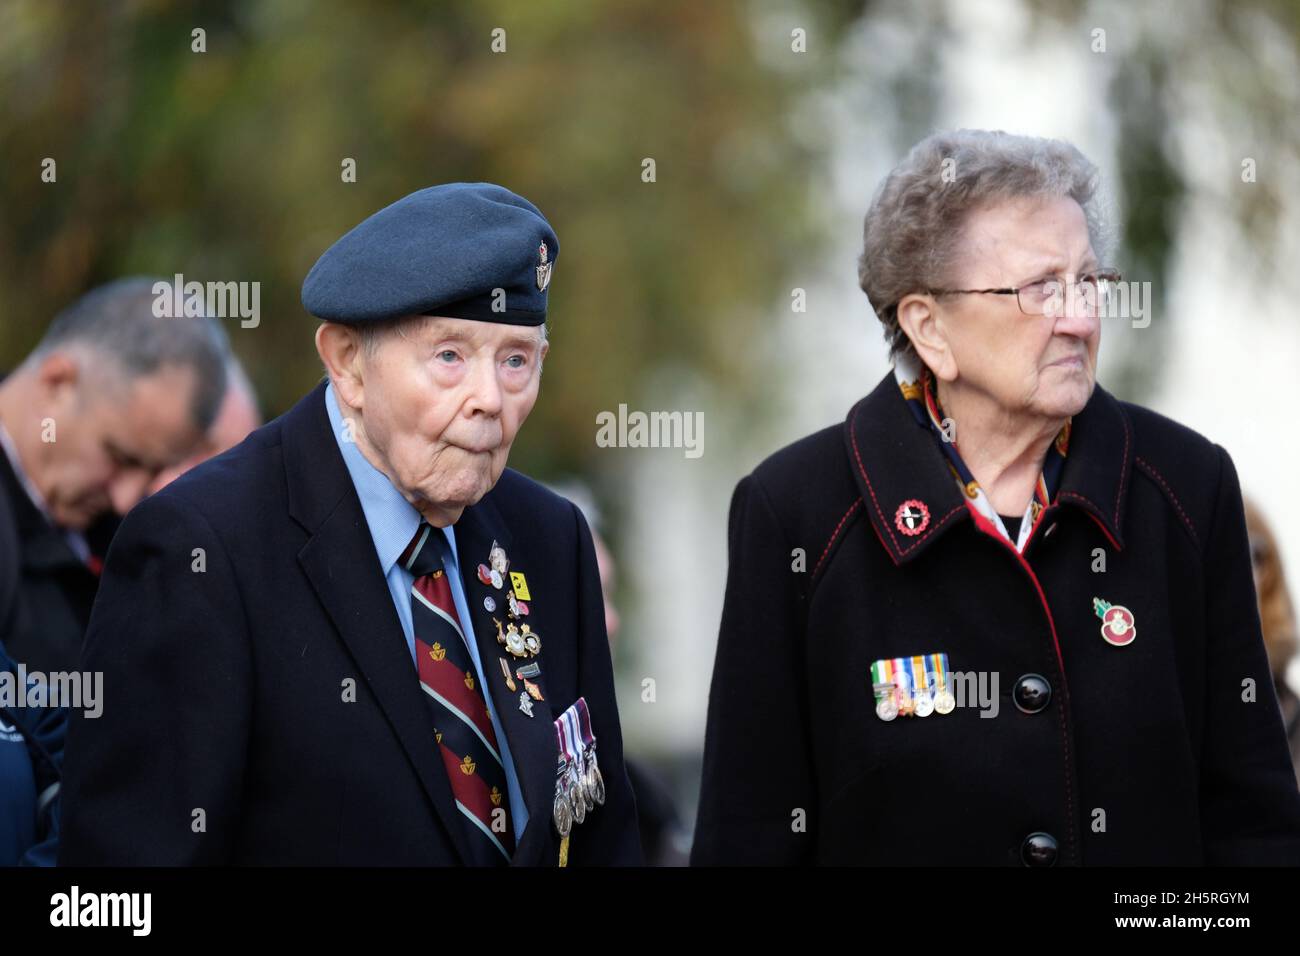 Hereford, Herefordshire, UK - Thursday 11th November 2021 - Veterans gather at the Remembrance Day service in Hereford including Cyril Blewett aged 86 who served in the Royal Air Force during the Aden Emergency in the 1960s - Photo Steven May / Alamy Live News Stock Photo